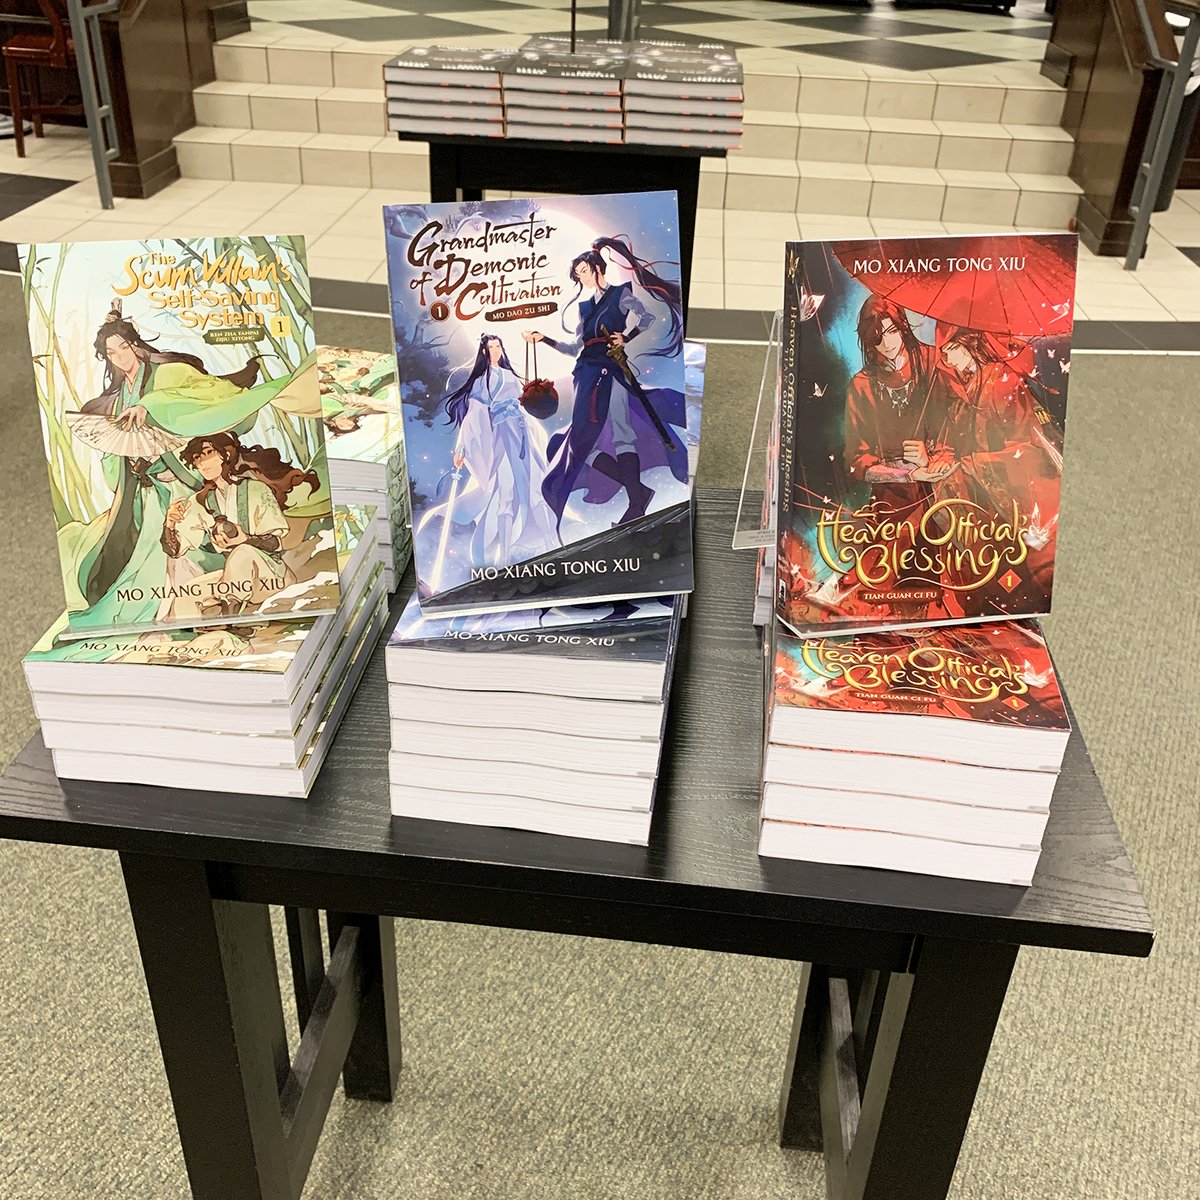 TODAY'S THE DAY! Our new English-language editions of the three #MXTX novel series have debuted in stores around the world! 🎉 #SevenSeasDanmei

Check out this great set-up at a local Barnes & Noble! If you have photos of your own store display, let us know with #mxtxbkstore 👀